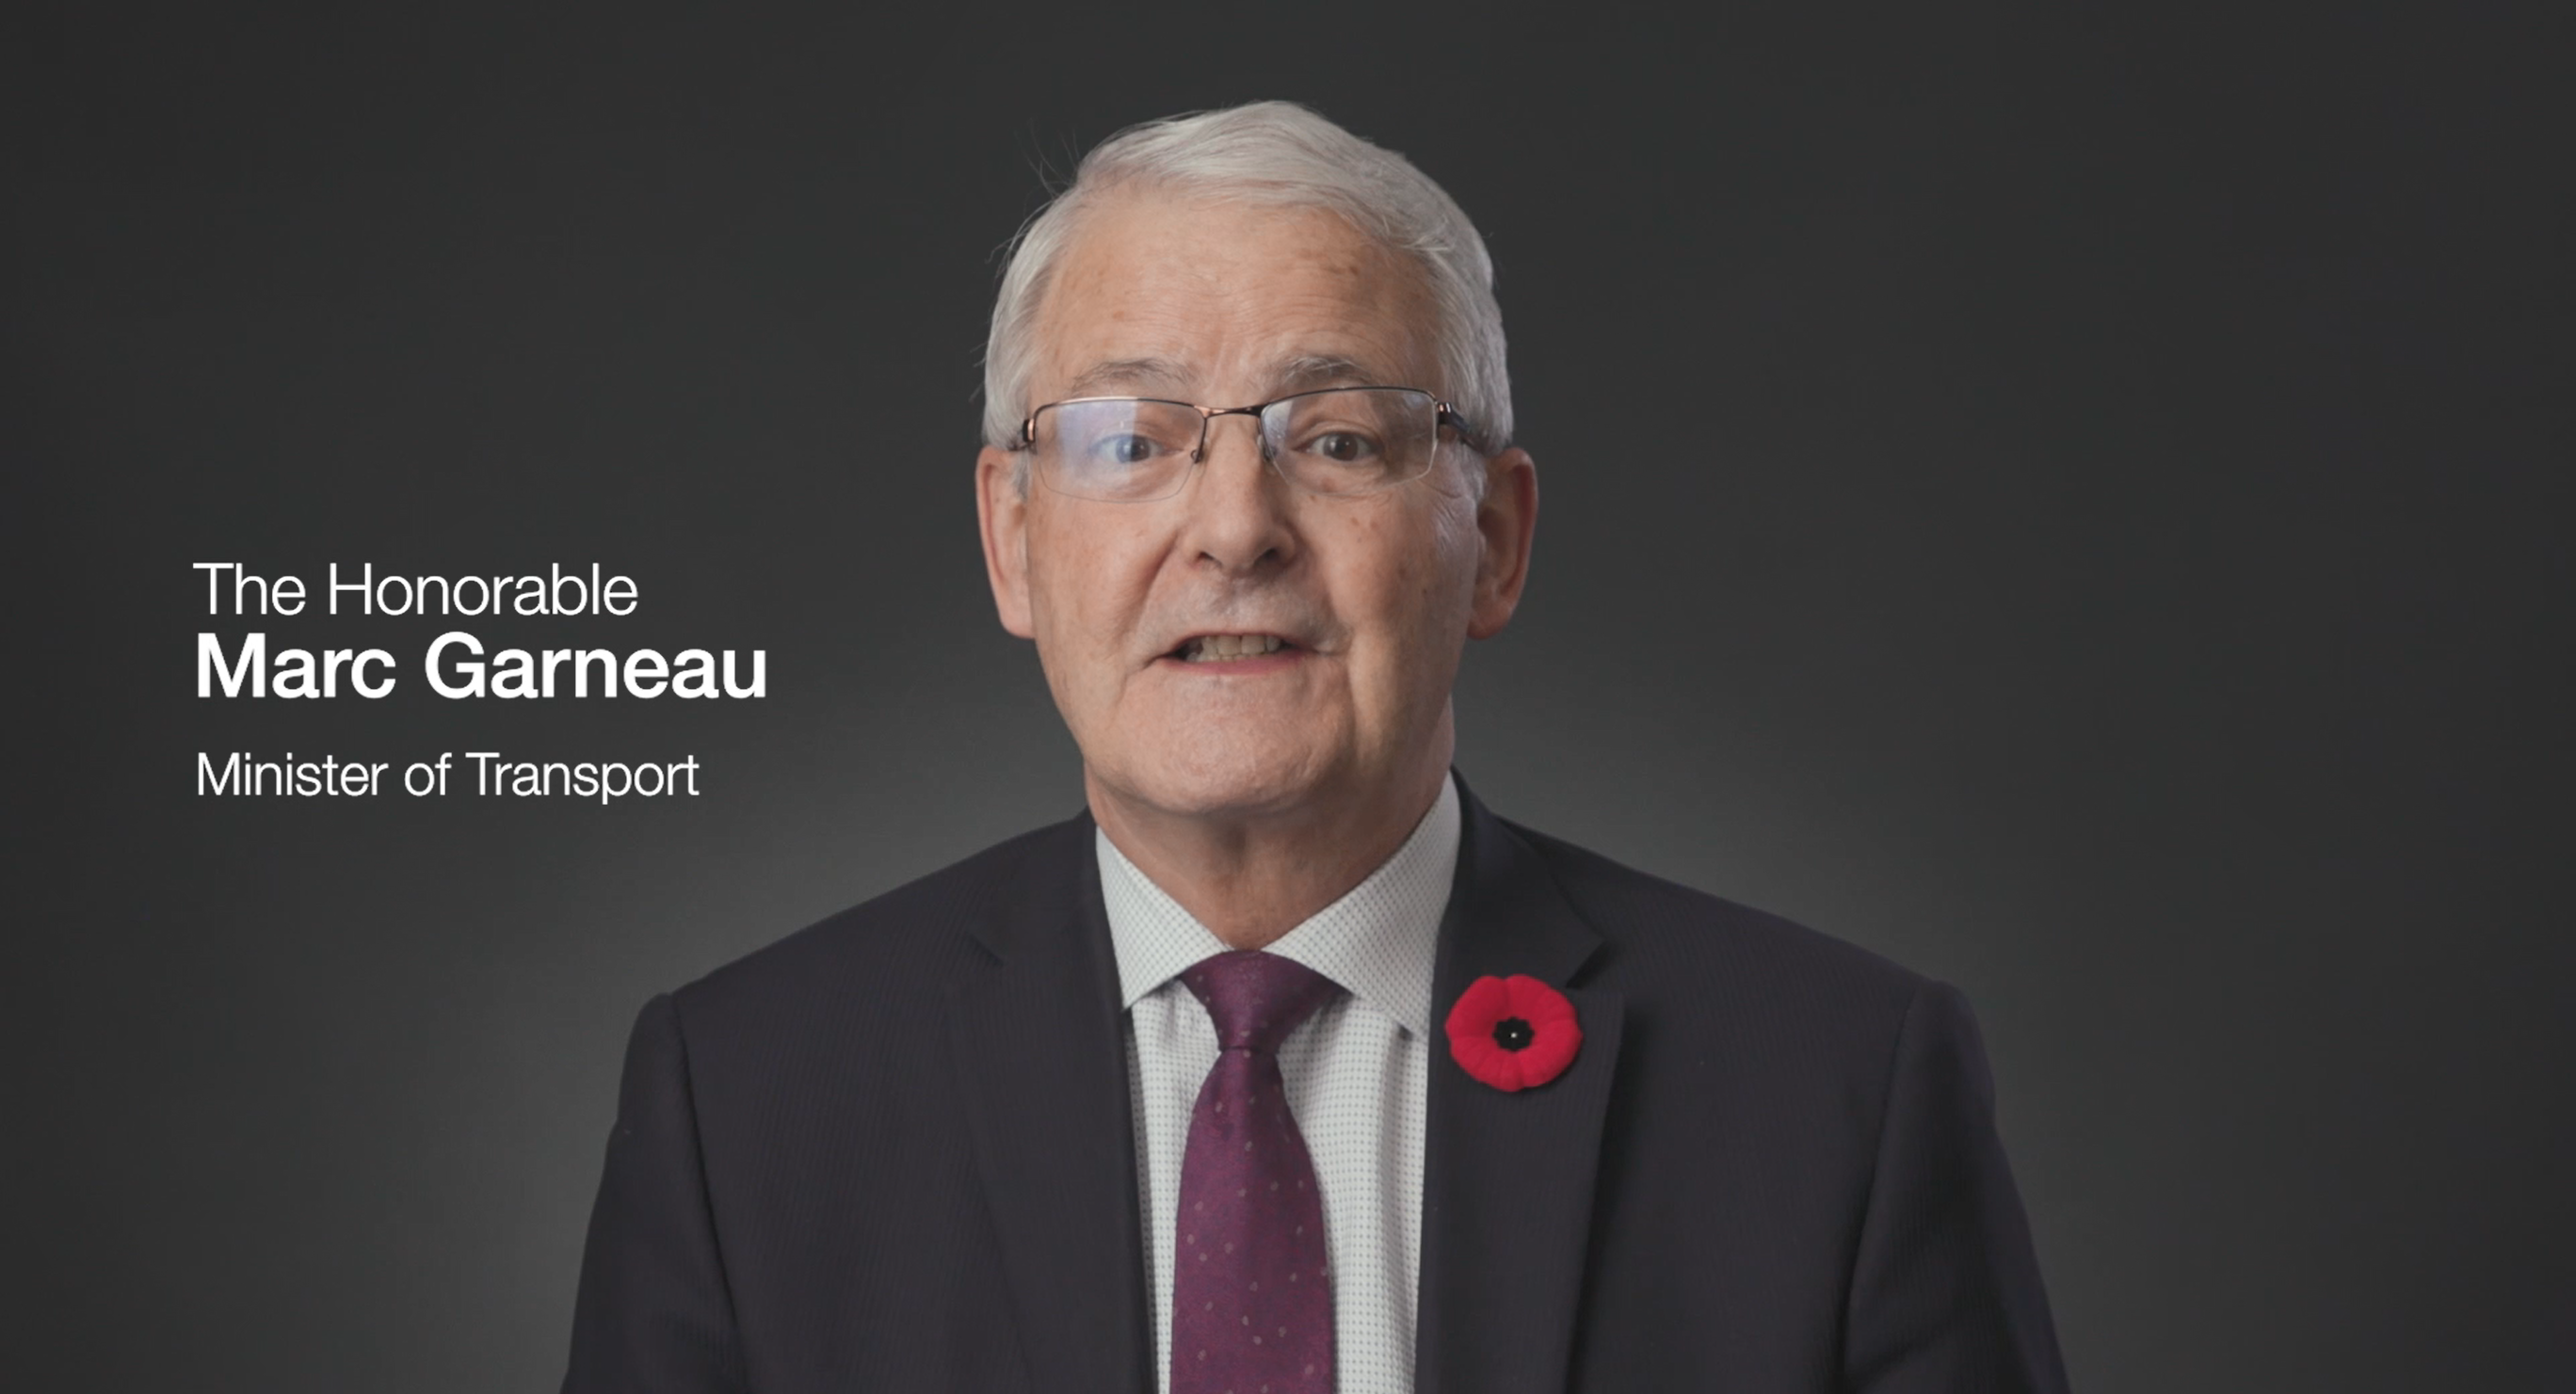 The Honorable Marc Garneau, Minister of Transport